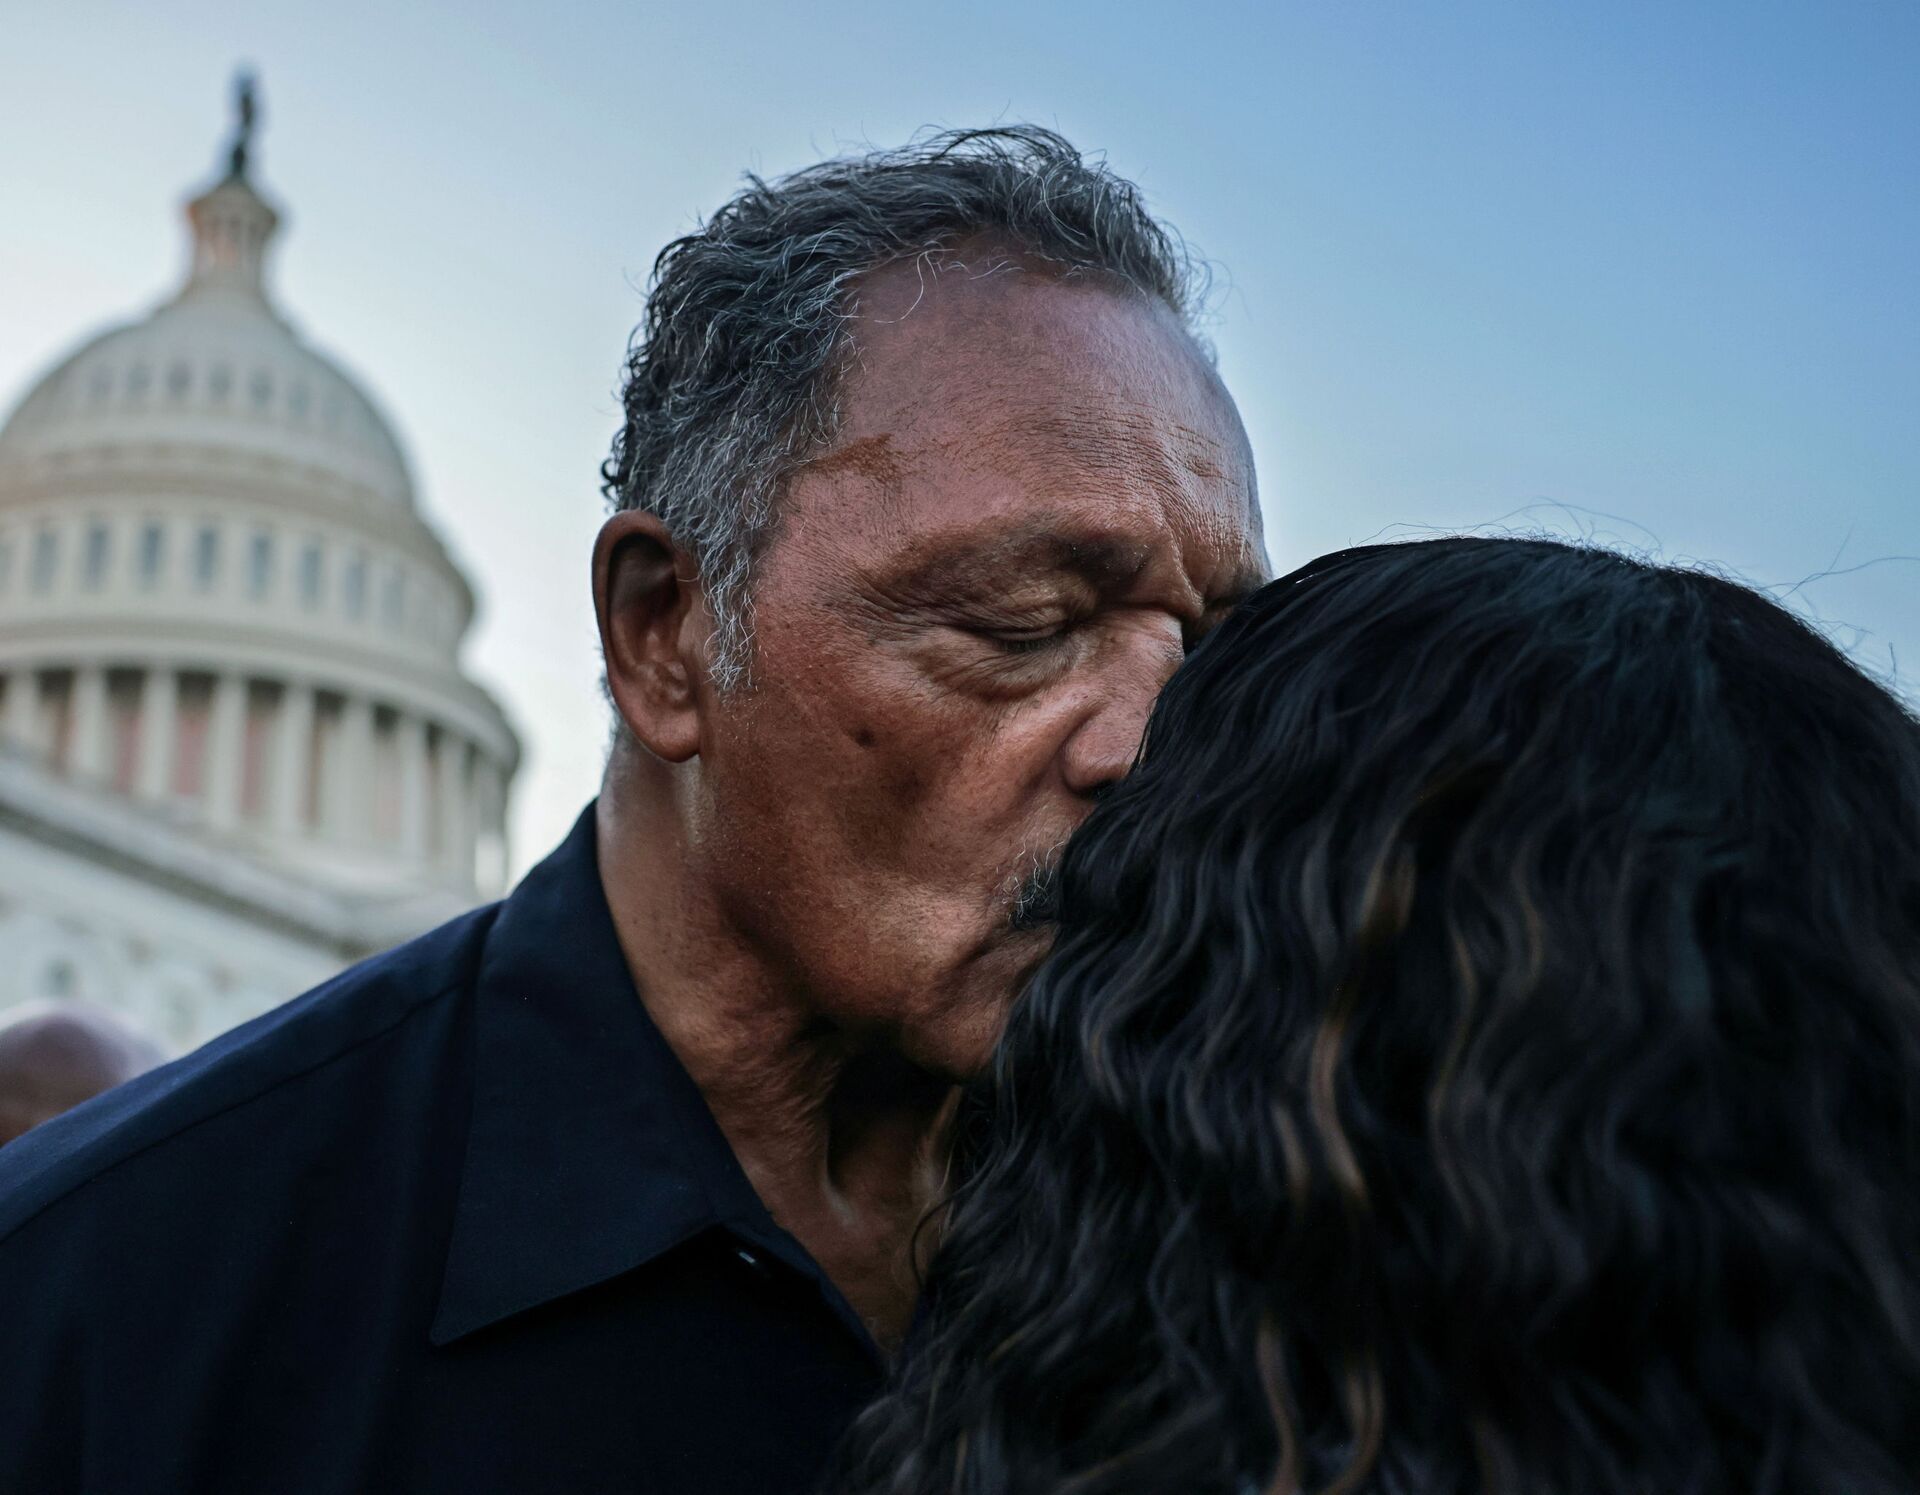 Reverend Jesse Jackson kisses the head of Representative Cori Bush (D-MO) outside the U.S. Capitol, before he leaves a demonstration where she has been spending the night to protest the expiration of the federal moratorium on residential evictions, in Washington, U.S., August 2, 2021. - Sputnik International, 1920, 07.09.2021